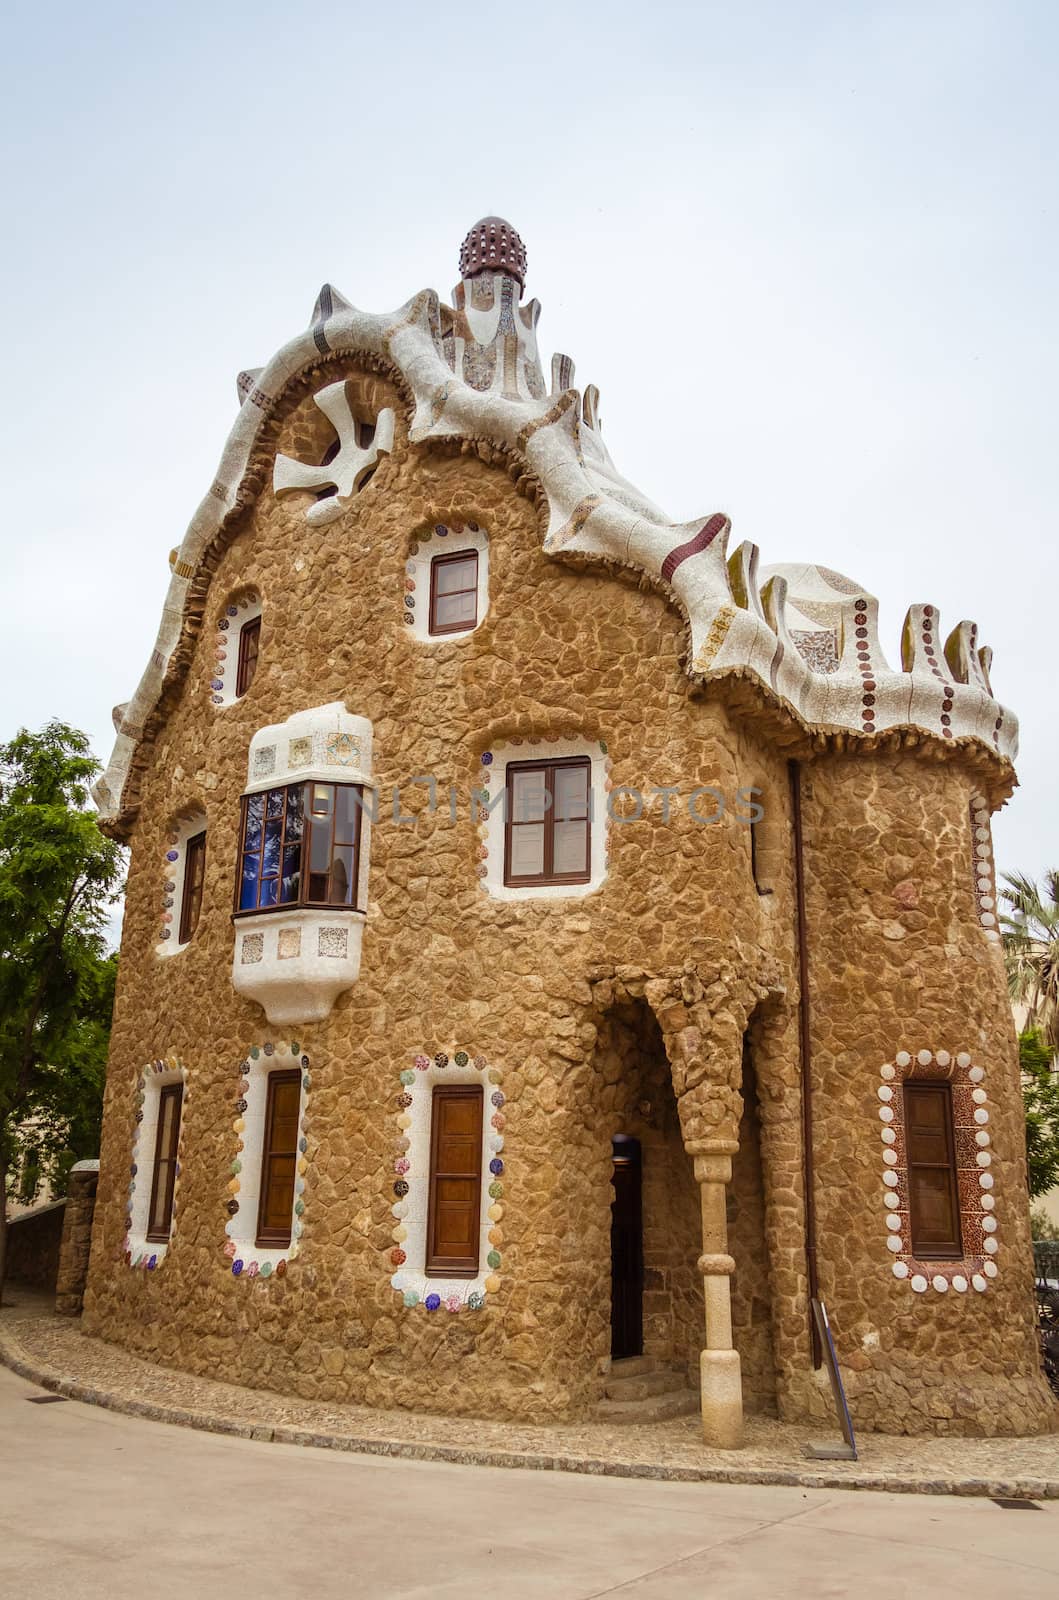 Entrance pavilion of the Park Guell, designed by Antonio Gaudi, in Barcelona, Spain